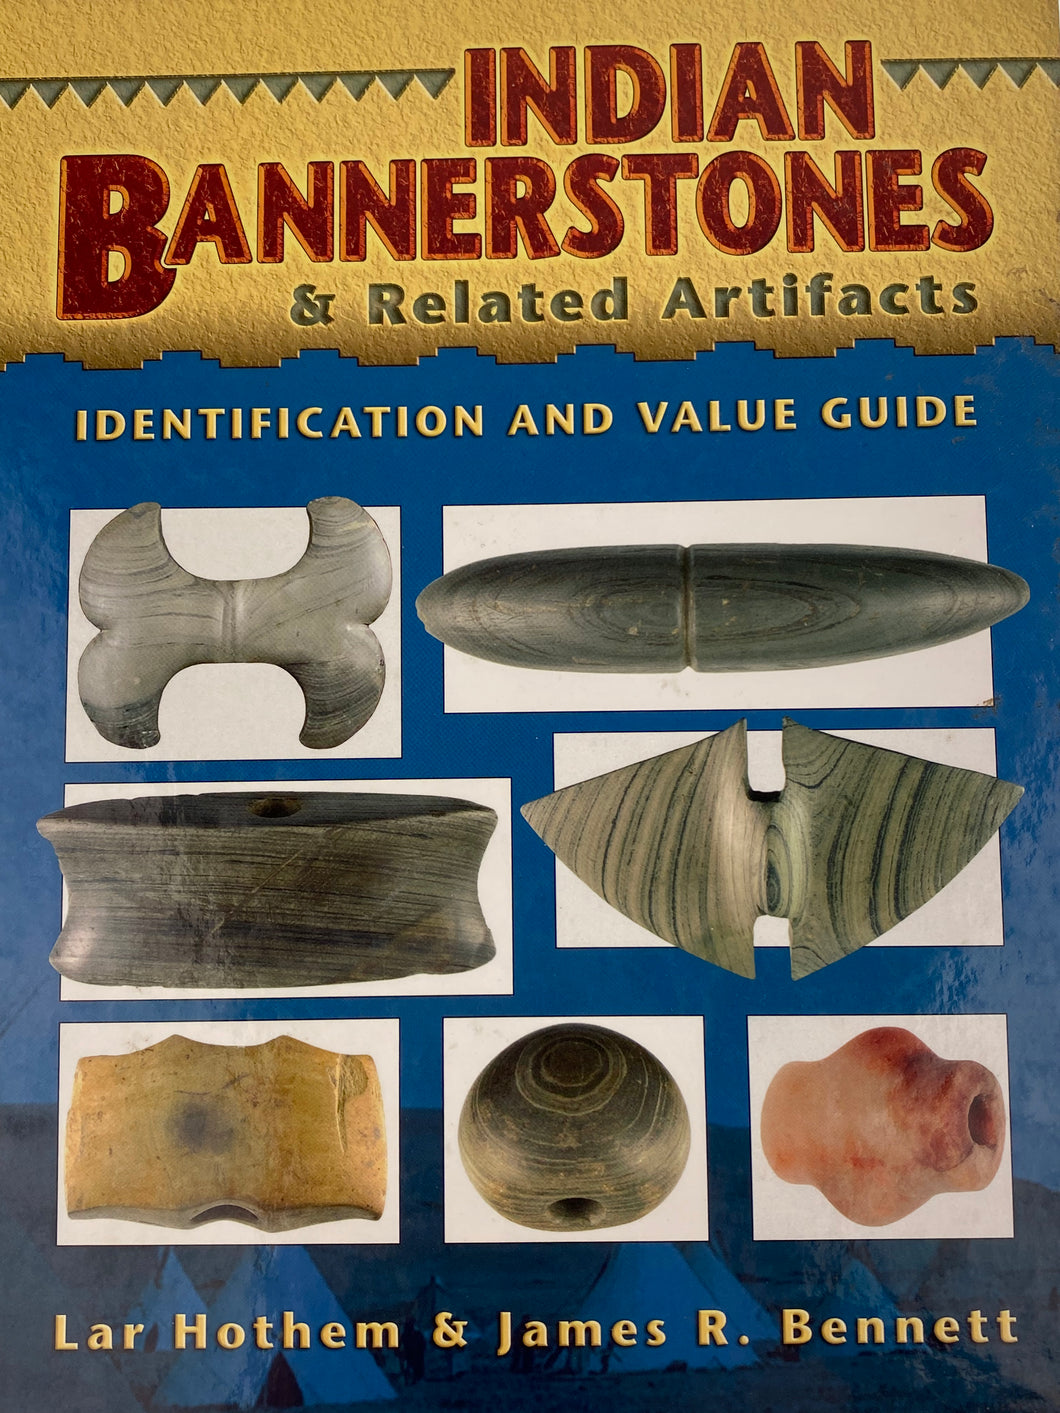 “Indian Bannerstones and Related Artifacts” identification and value guide by Hothem and Bennett